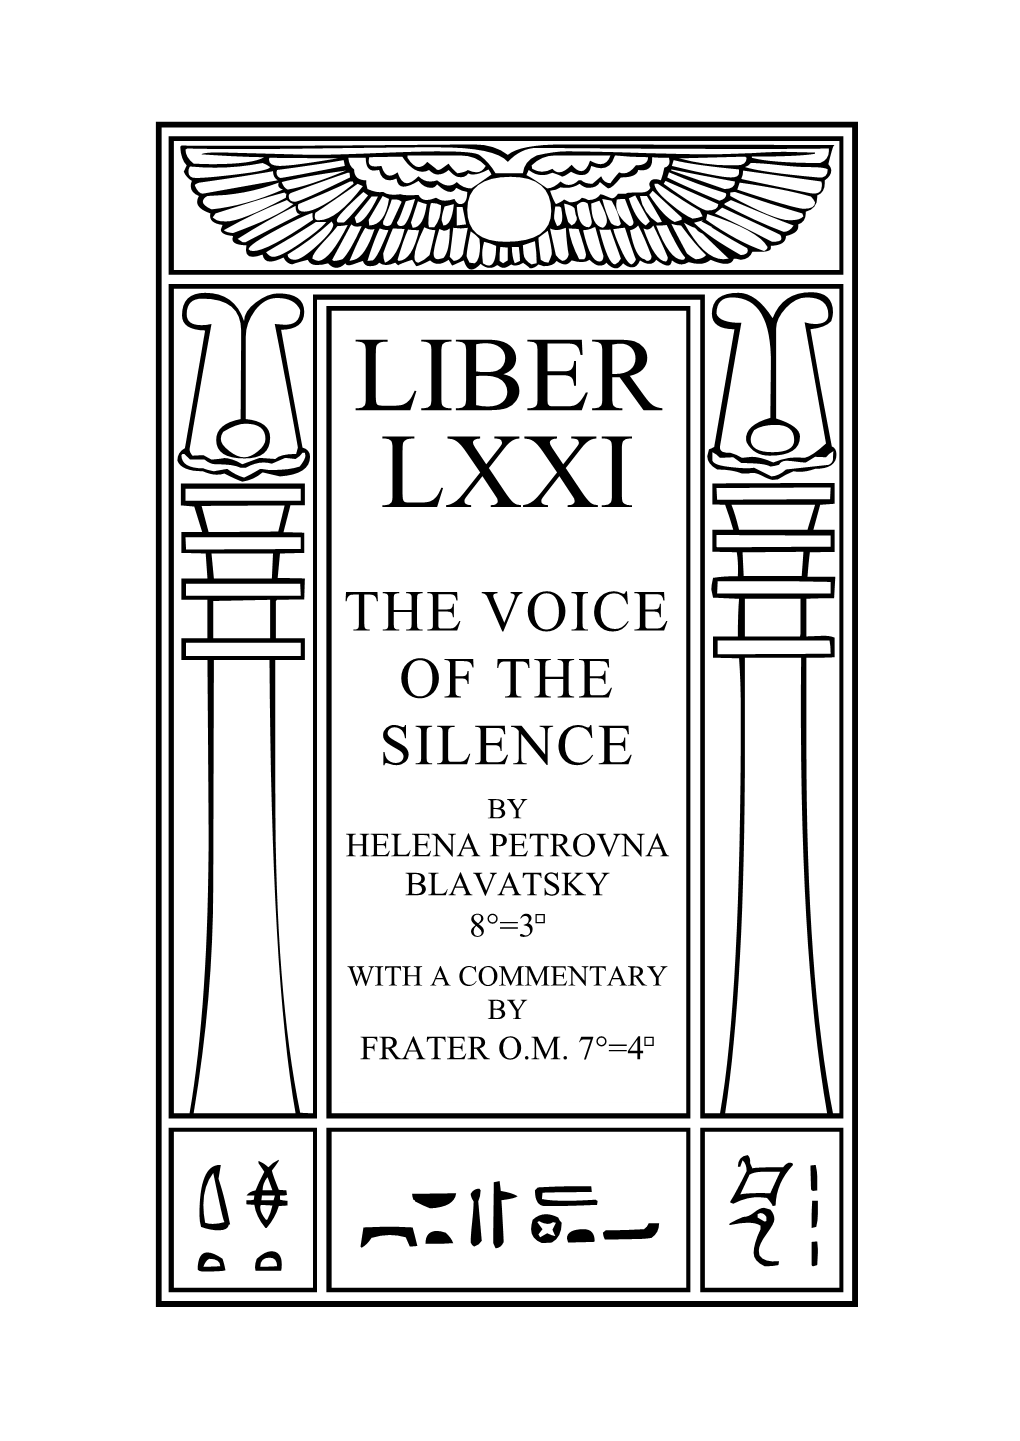 Liber LXXI: the Voice of the Silence, the Two Paths, the Seven Portals